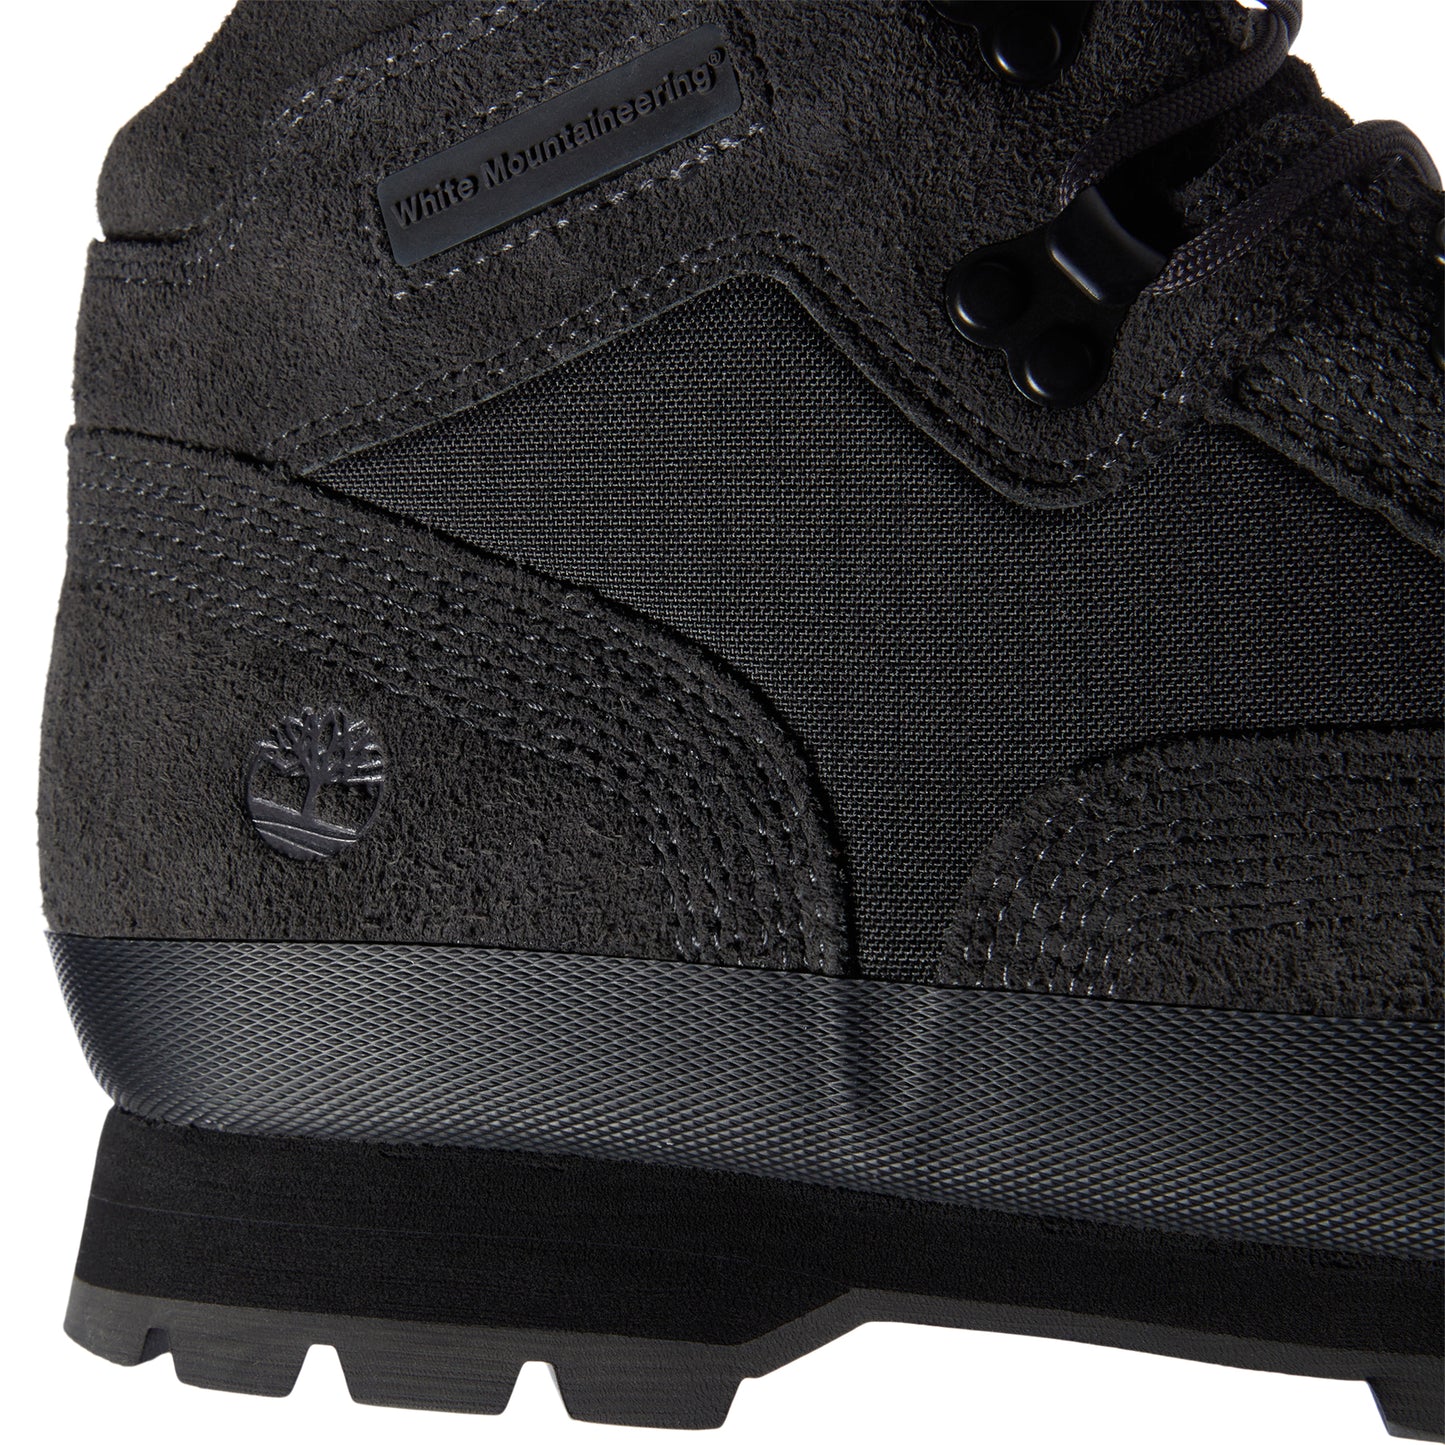 Timberland x White Mountaineering Euro Hiker (Black Suede)